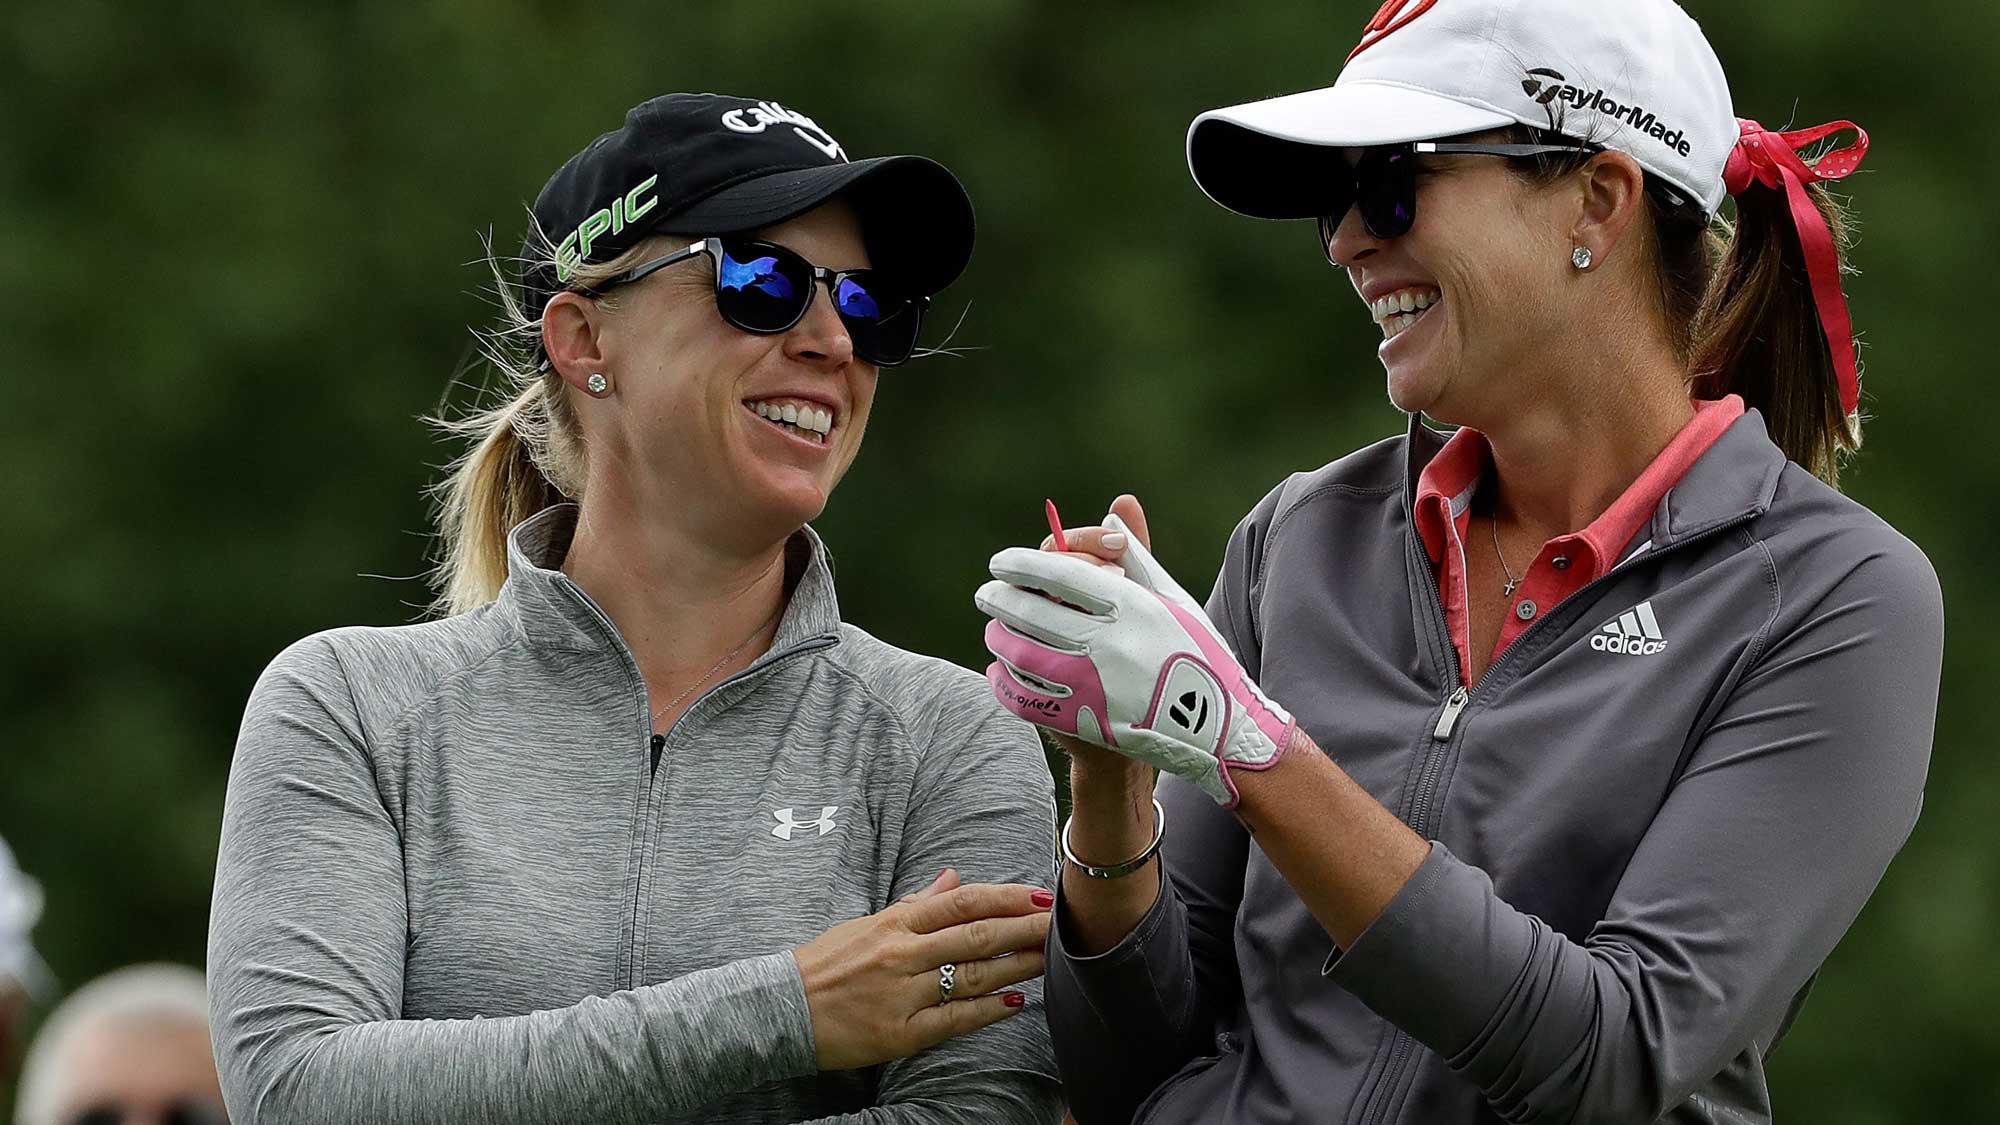 (L) Morgan Pressel and (R) Paula Creamer laugh together on the third tee during a practice round prior to the 2017 KPMG PGA Championship 